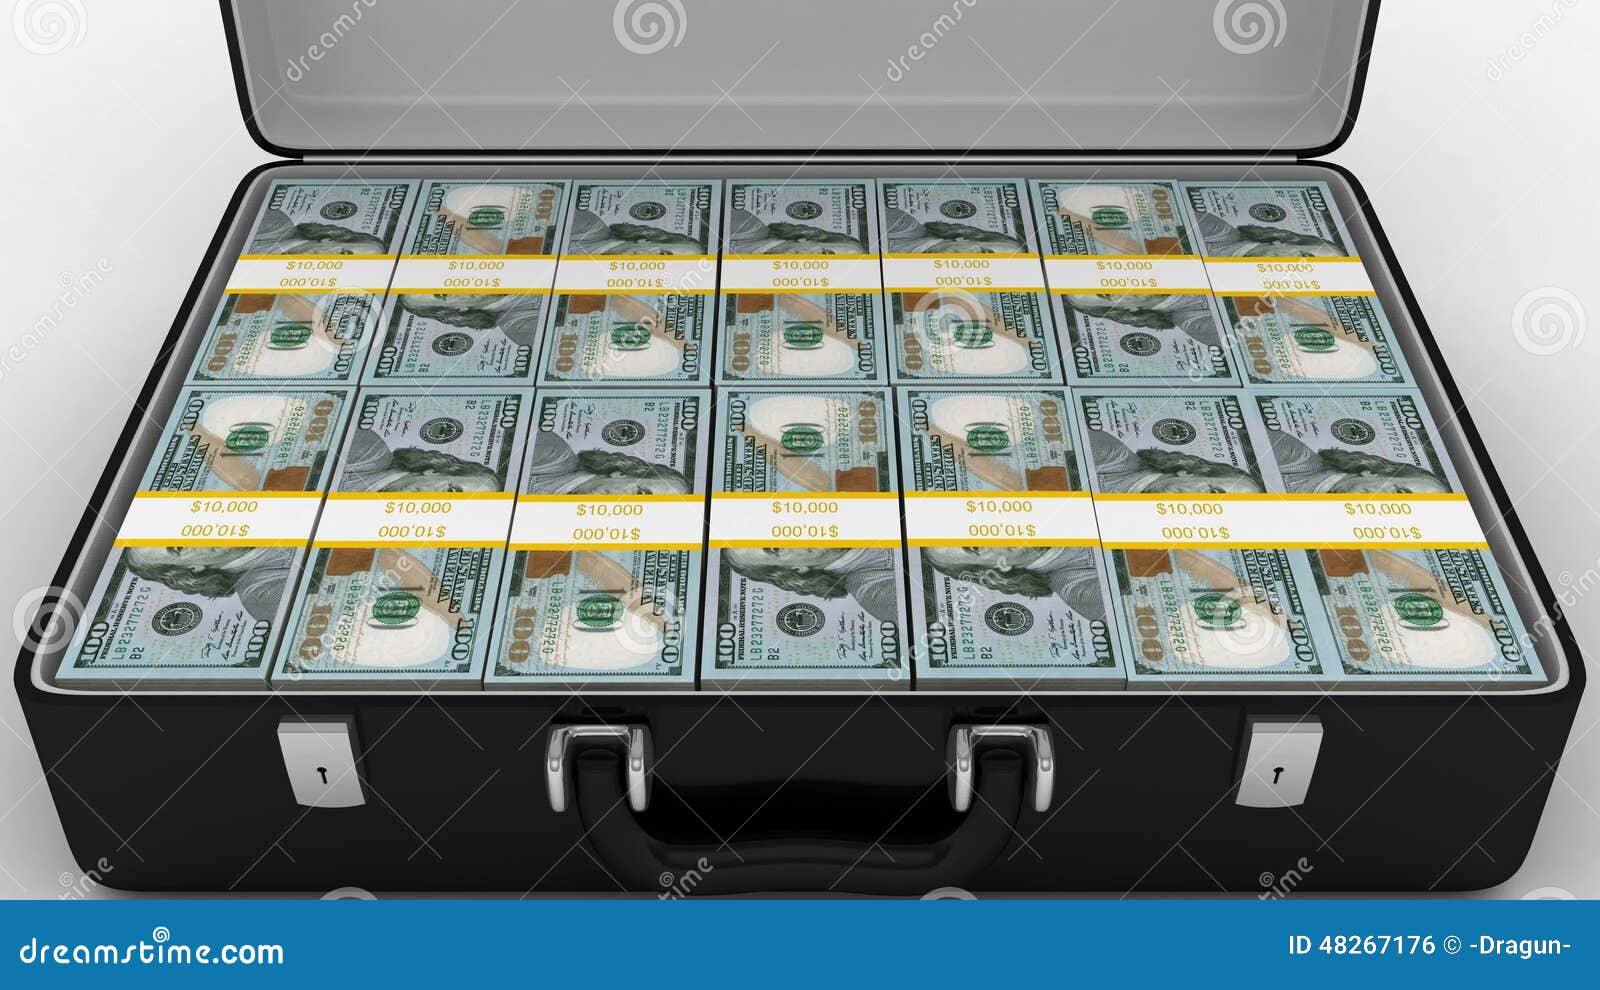 Baggage Suitcase Full Money Vacations Hand Stock Footage Video (100%  Royalty-free) 22430275